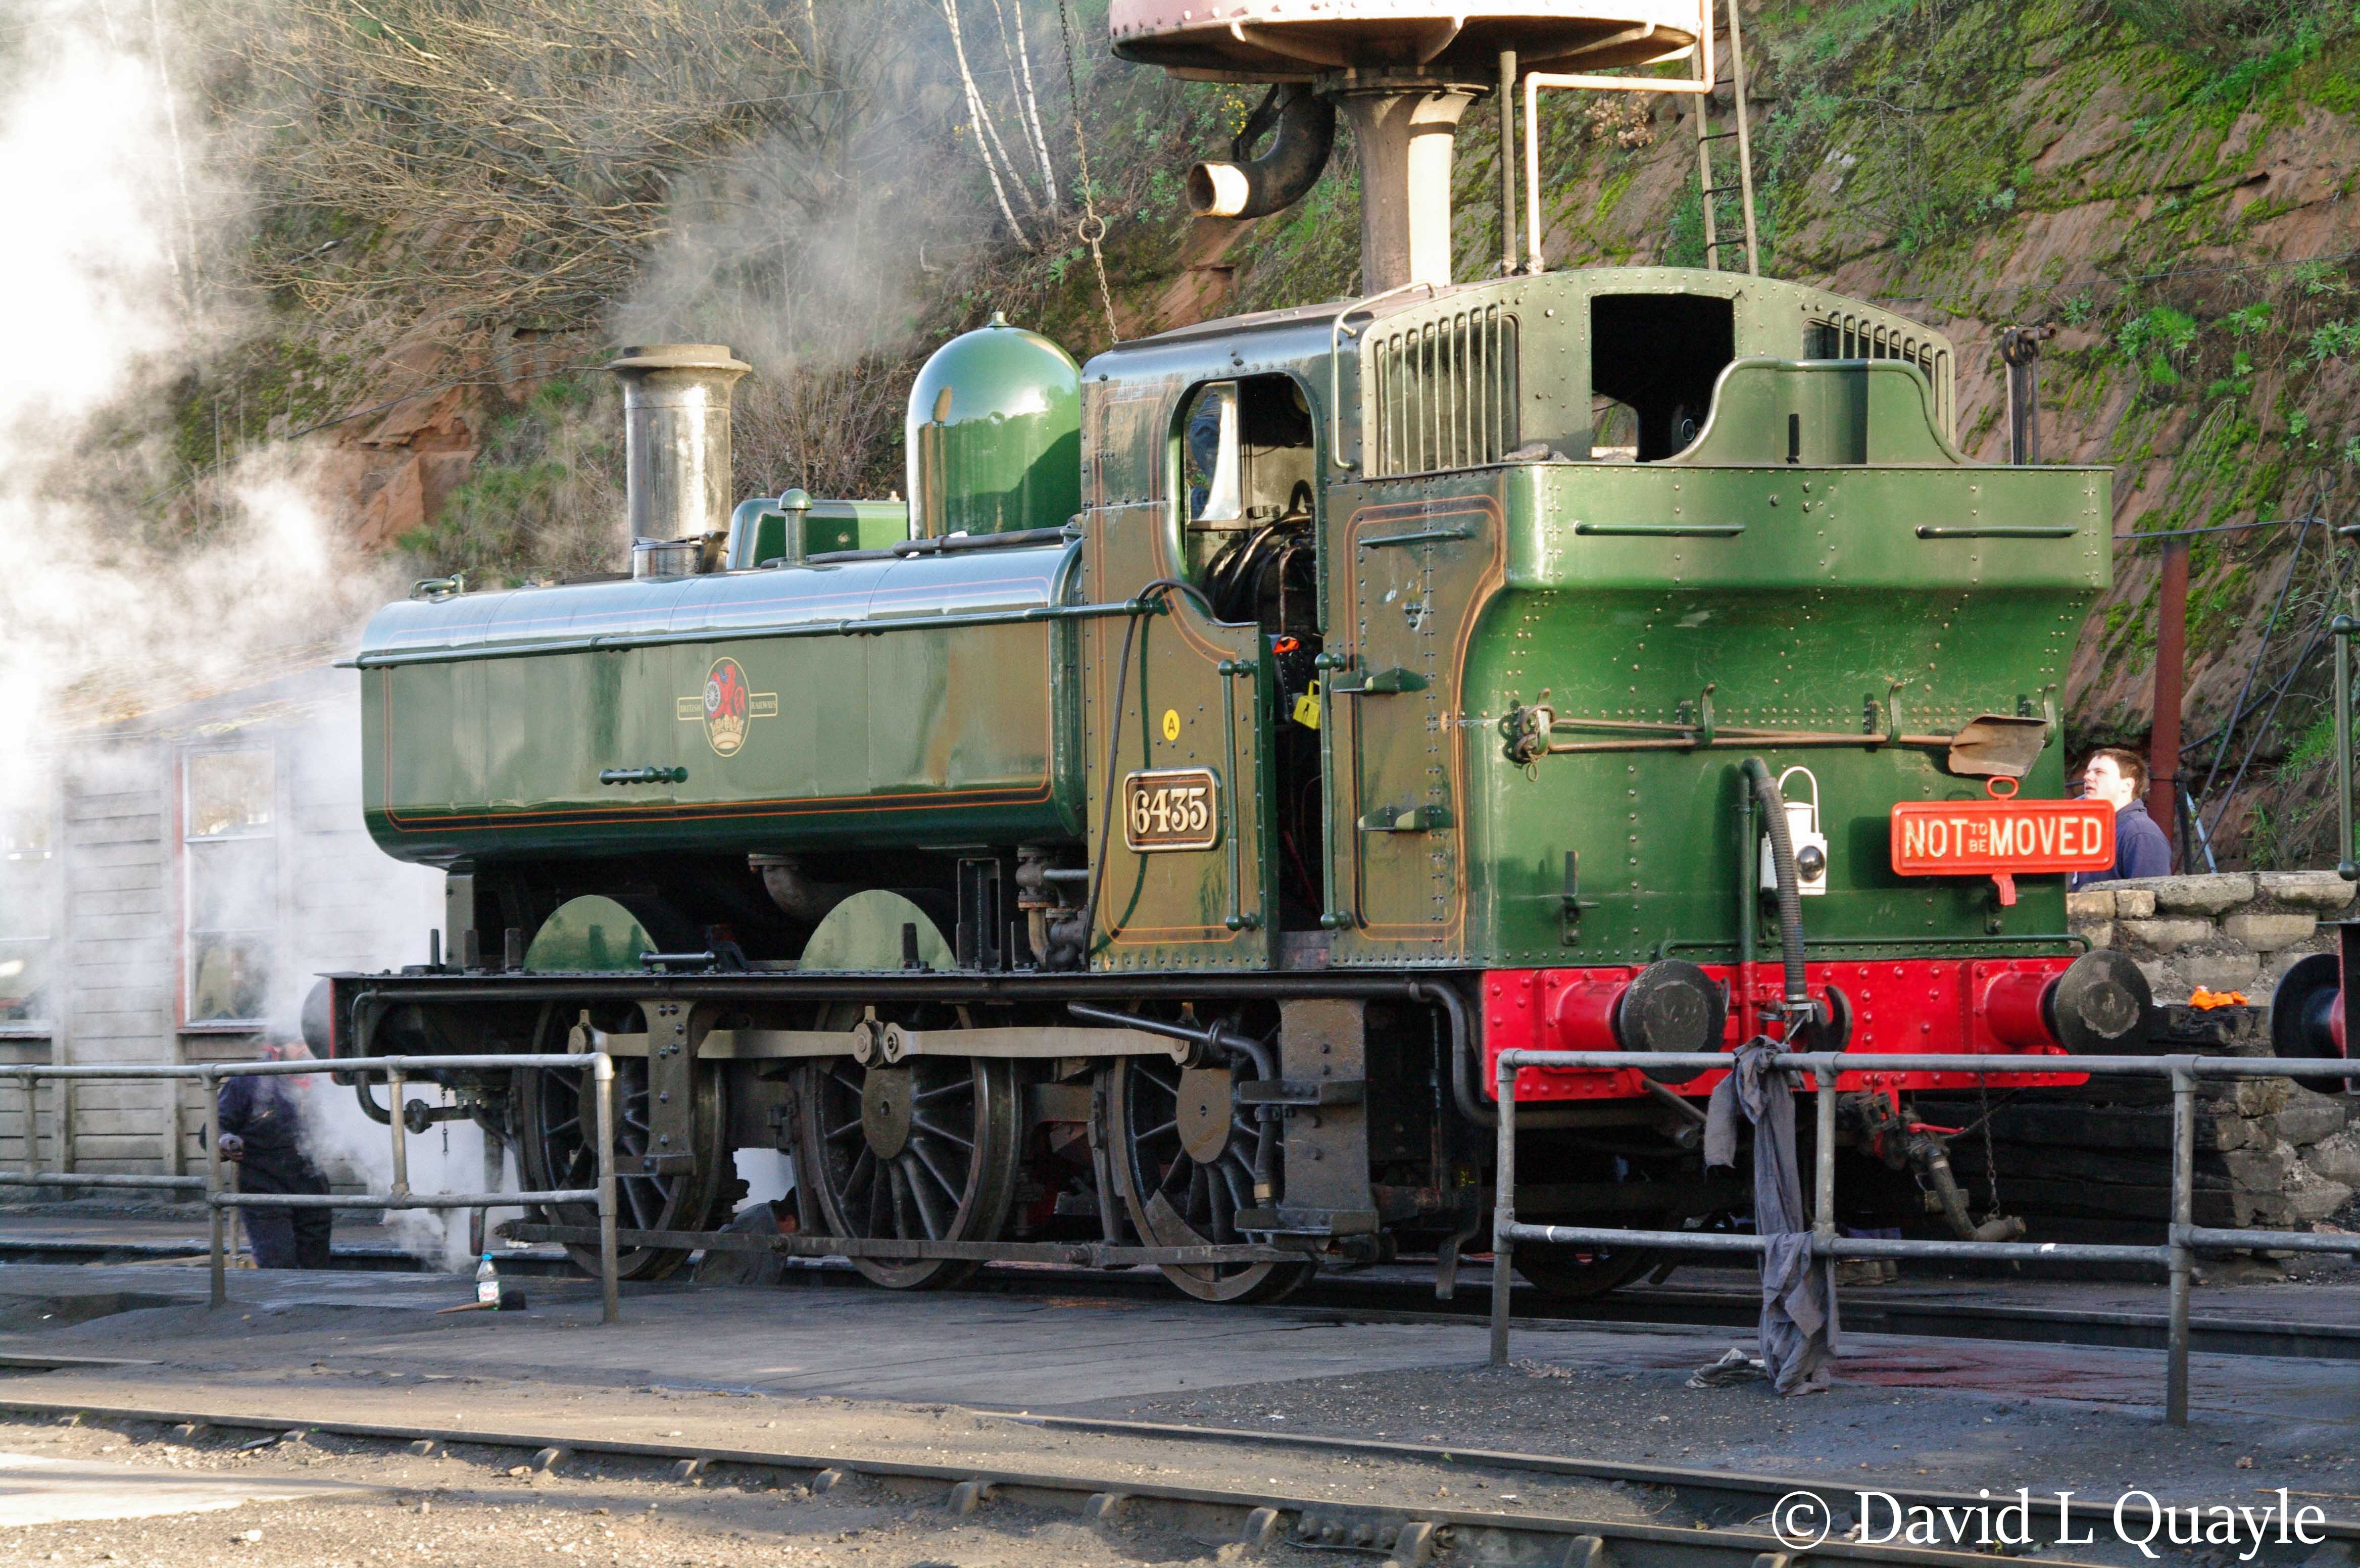 Comptons en images - Page 32 6435-at-bewdley-on-the-severn-valley-railway-march-2014-bbb